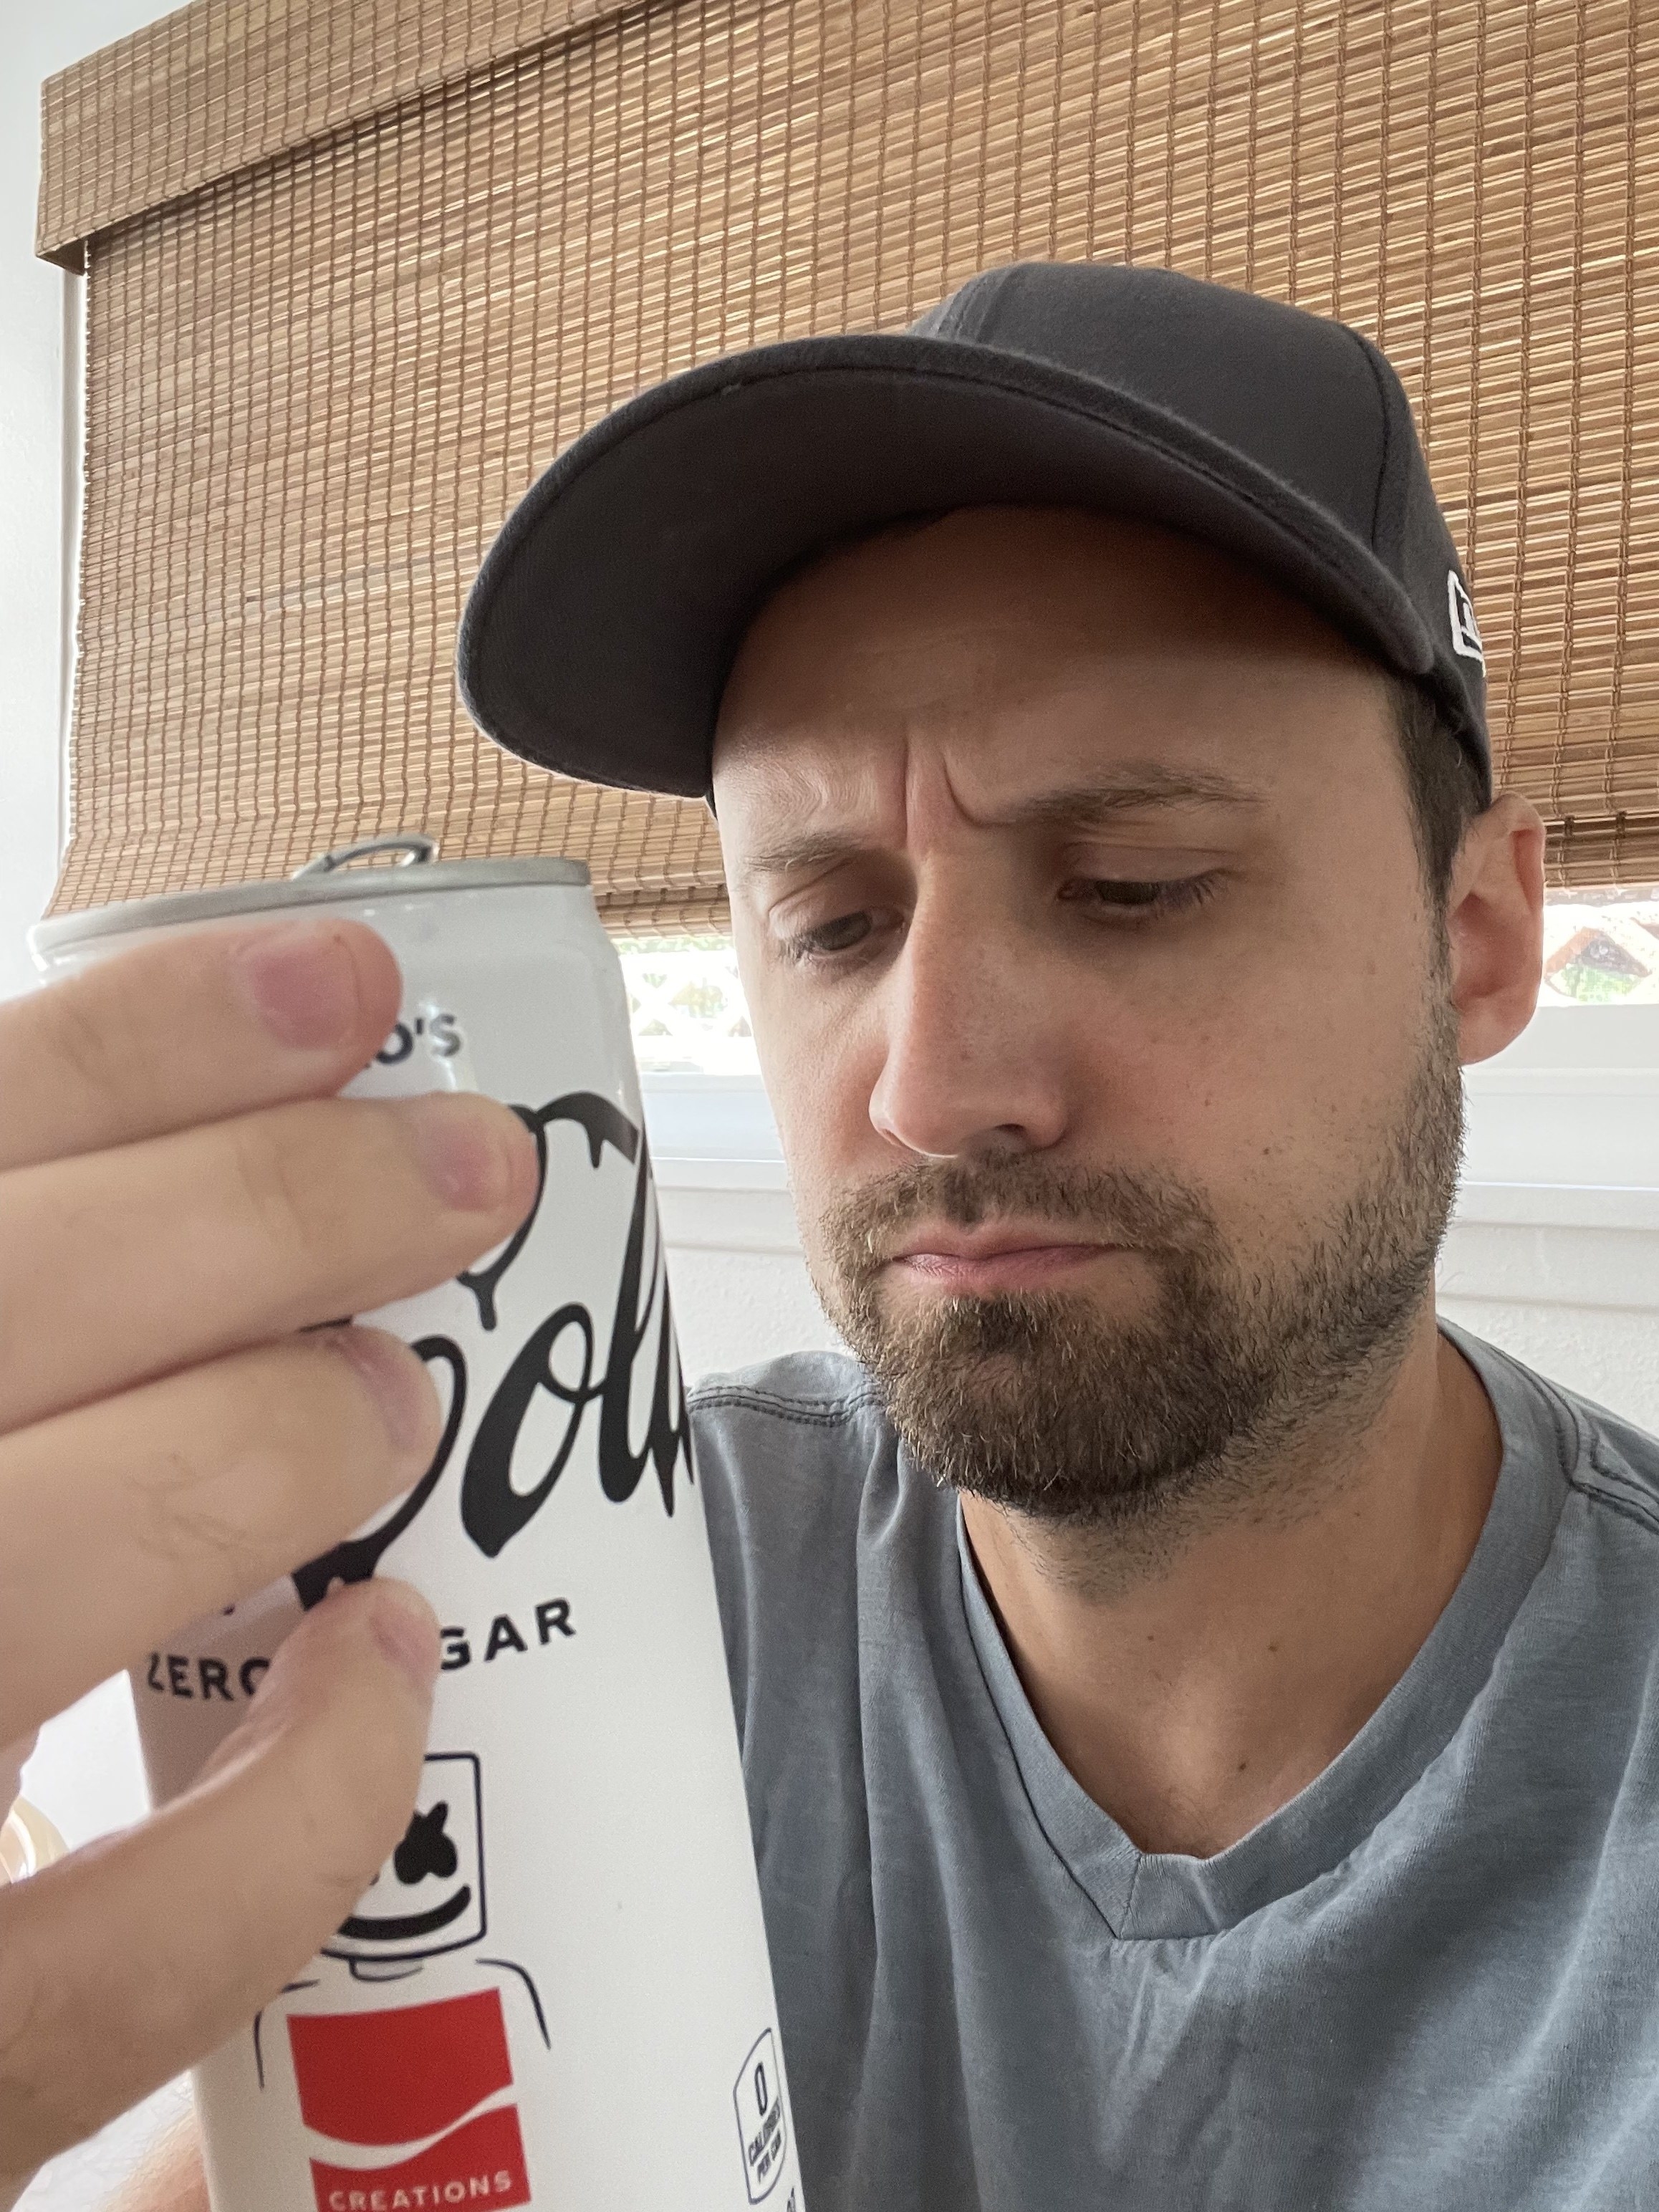 The author looking at the writing on the can